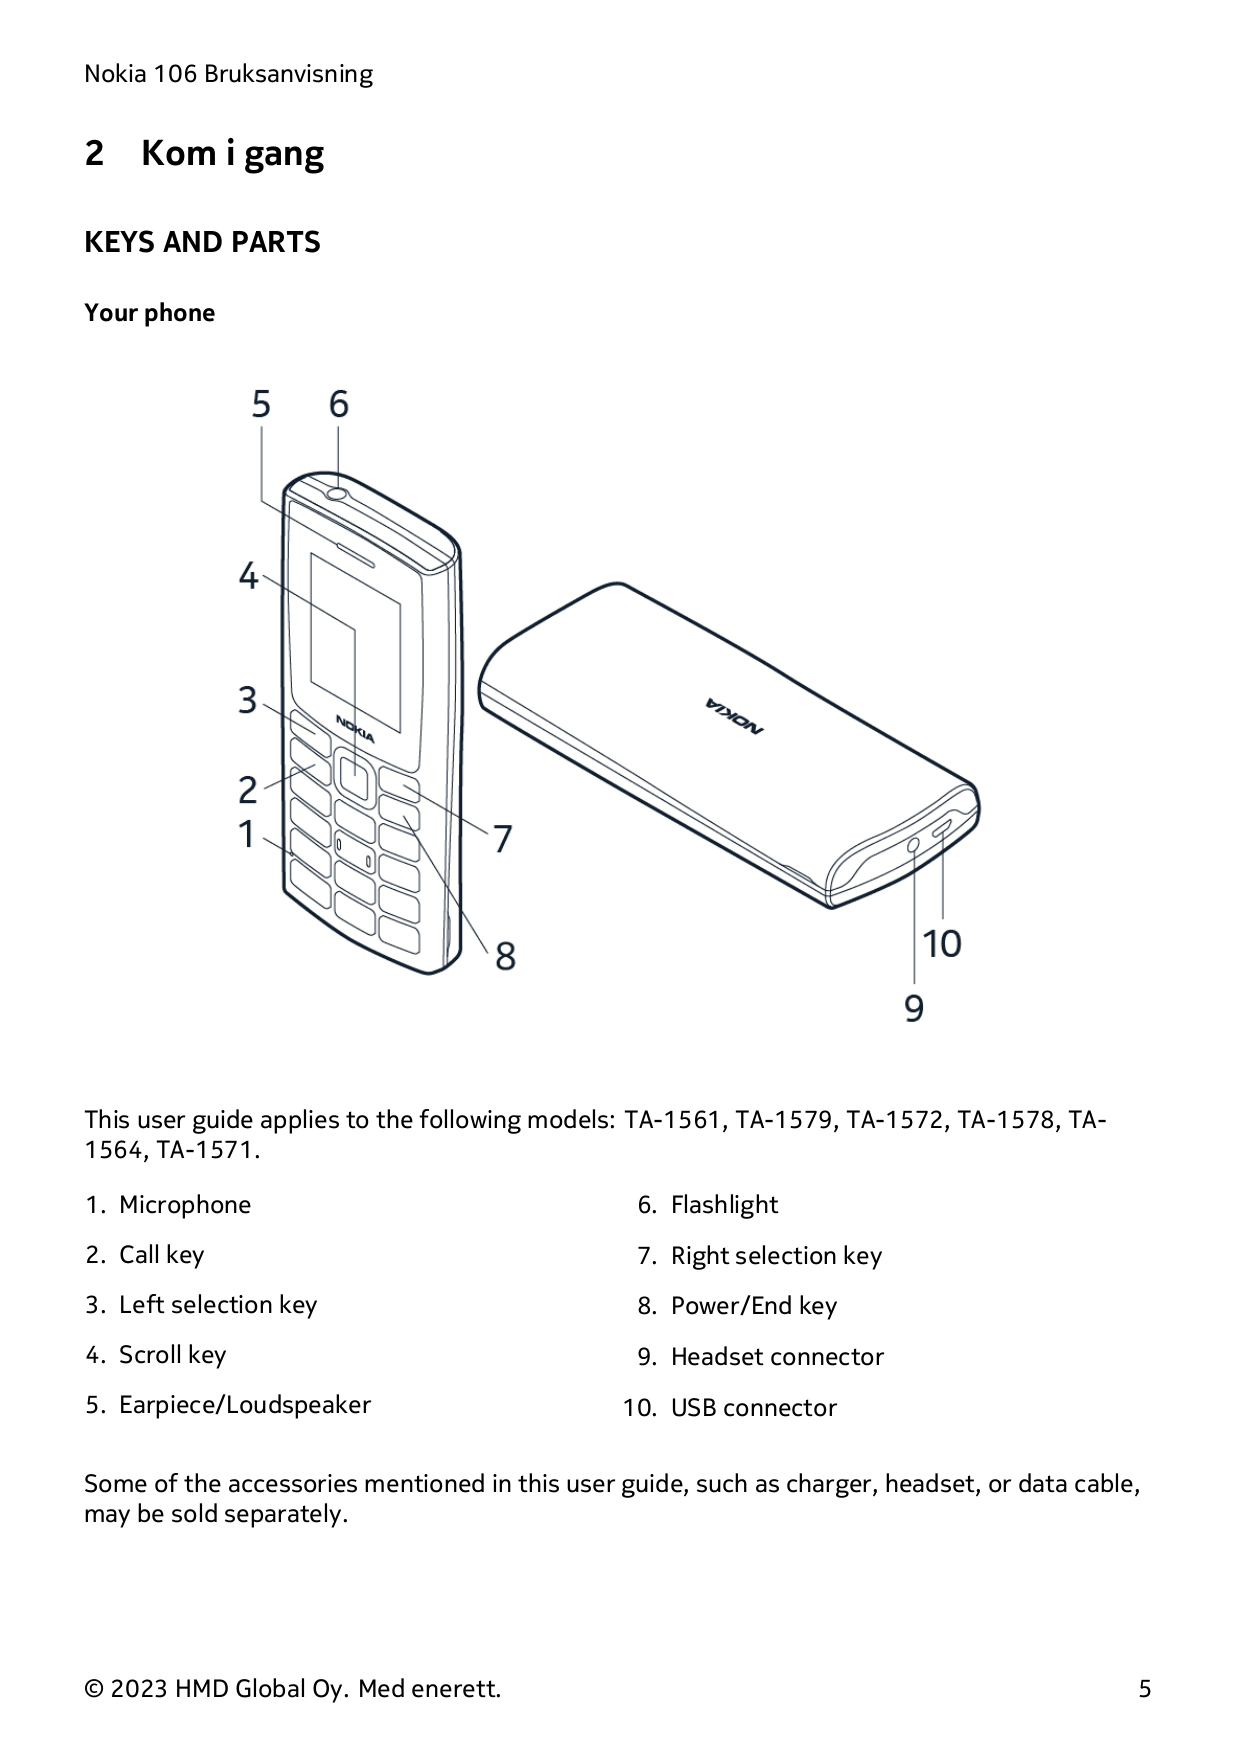 Nokia 106 Bruksanvisning2Kom i gangKEYS AND PARTSYour phoneThis user guide applies to the following models: TA-1561, TA-1579, TA